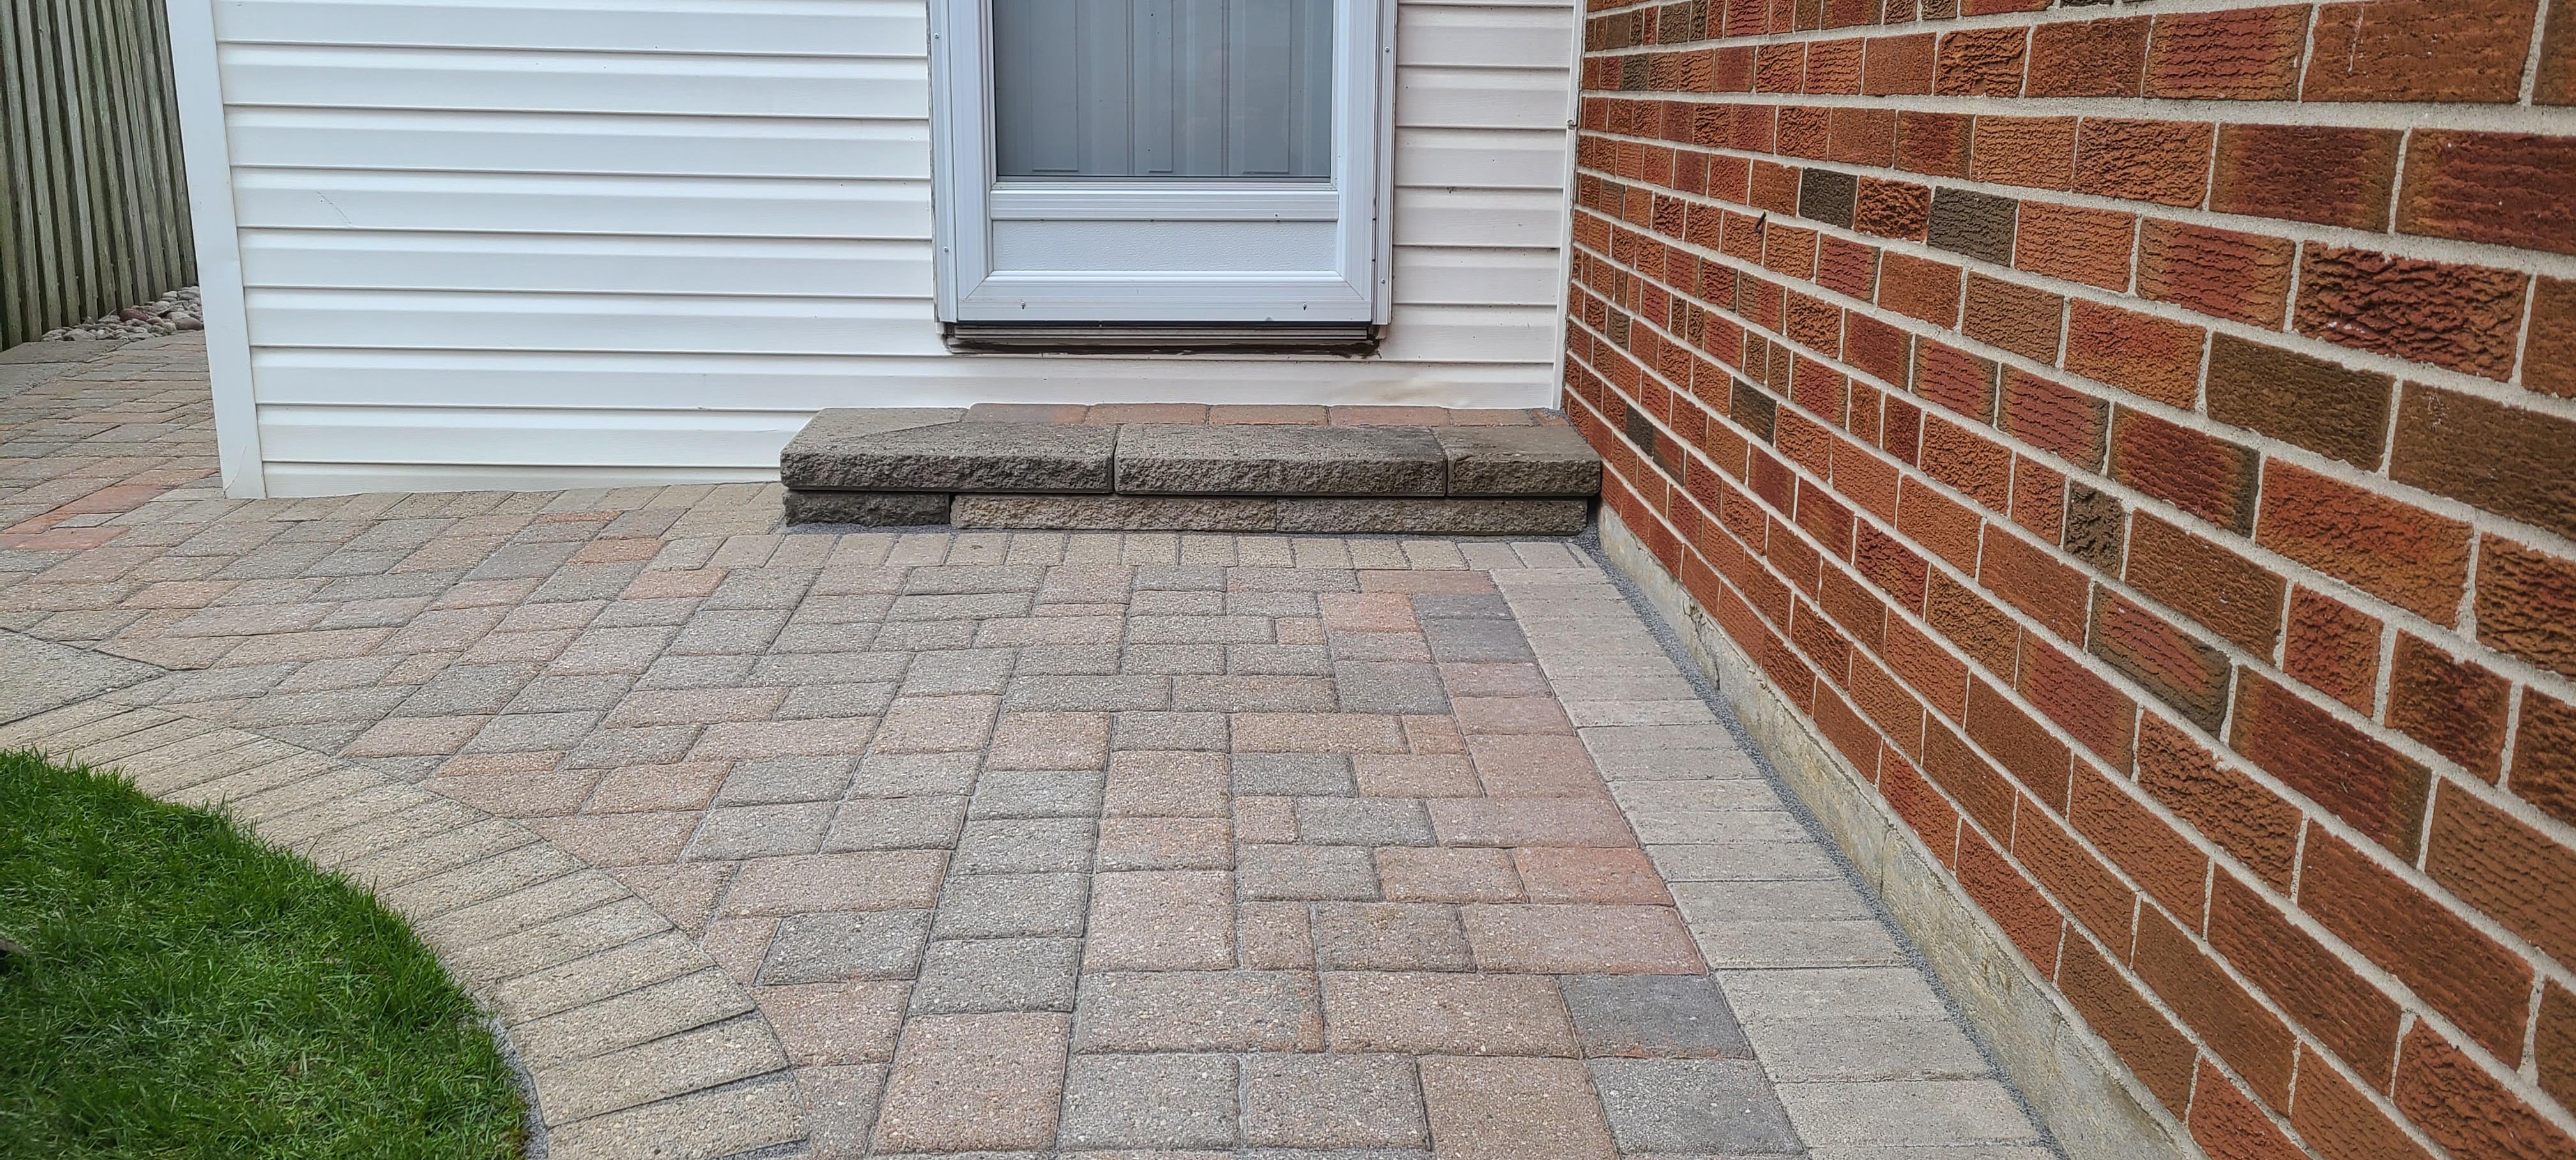 How to Restore Brick Pavers Correctly and Effectively